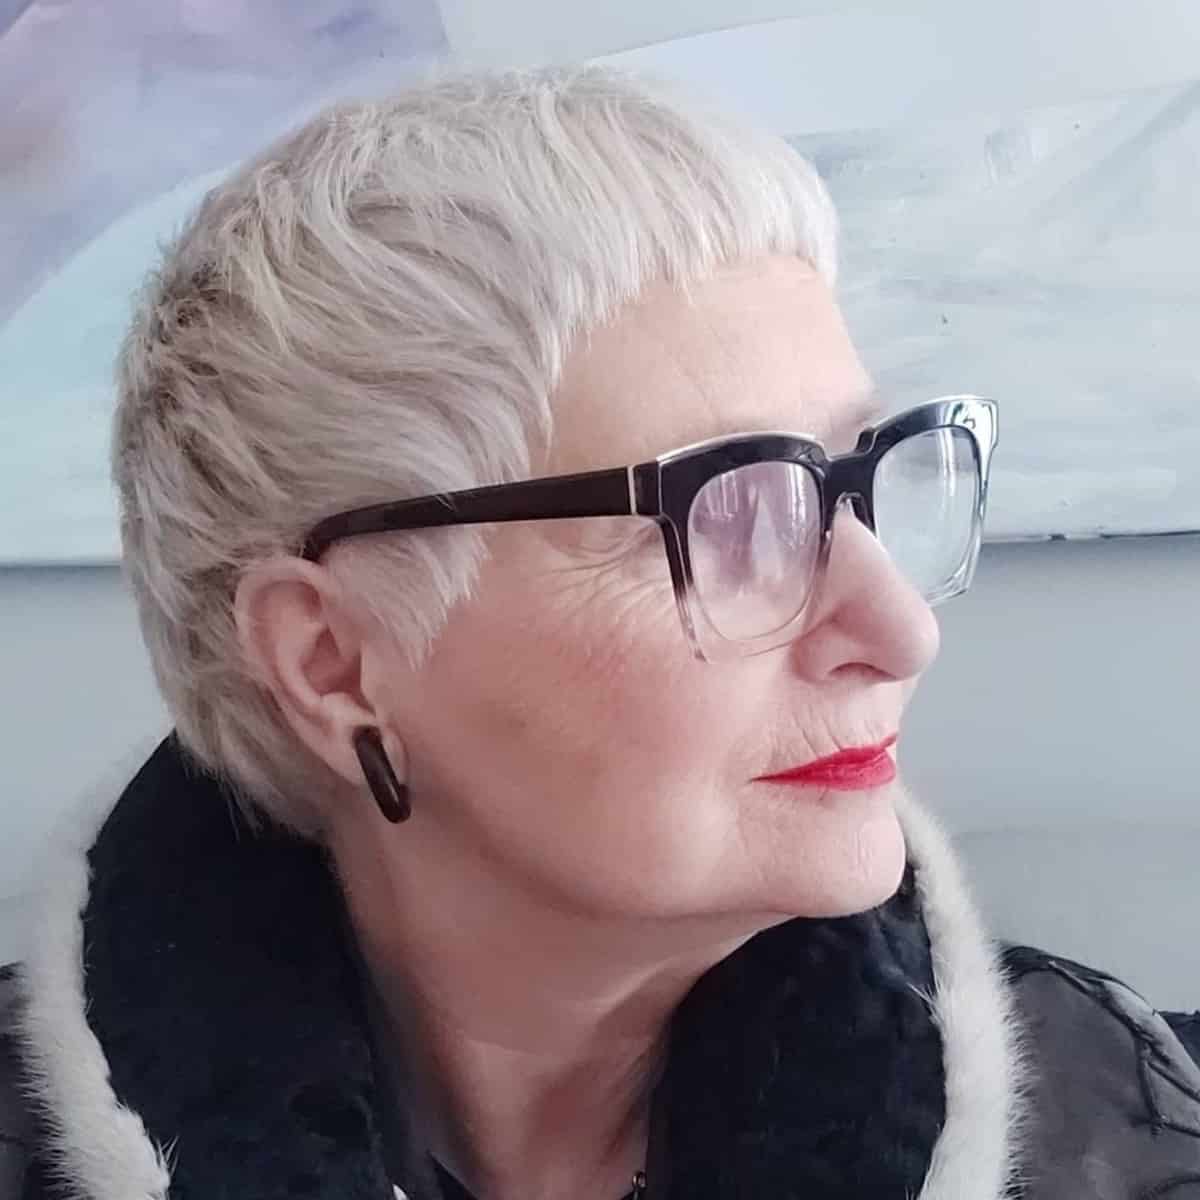 15 Flattering Short Hairstyles for Women Over 60 with Glasses